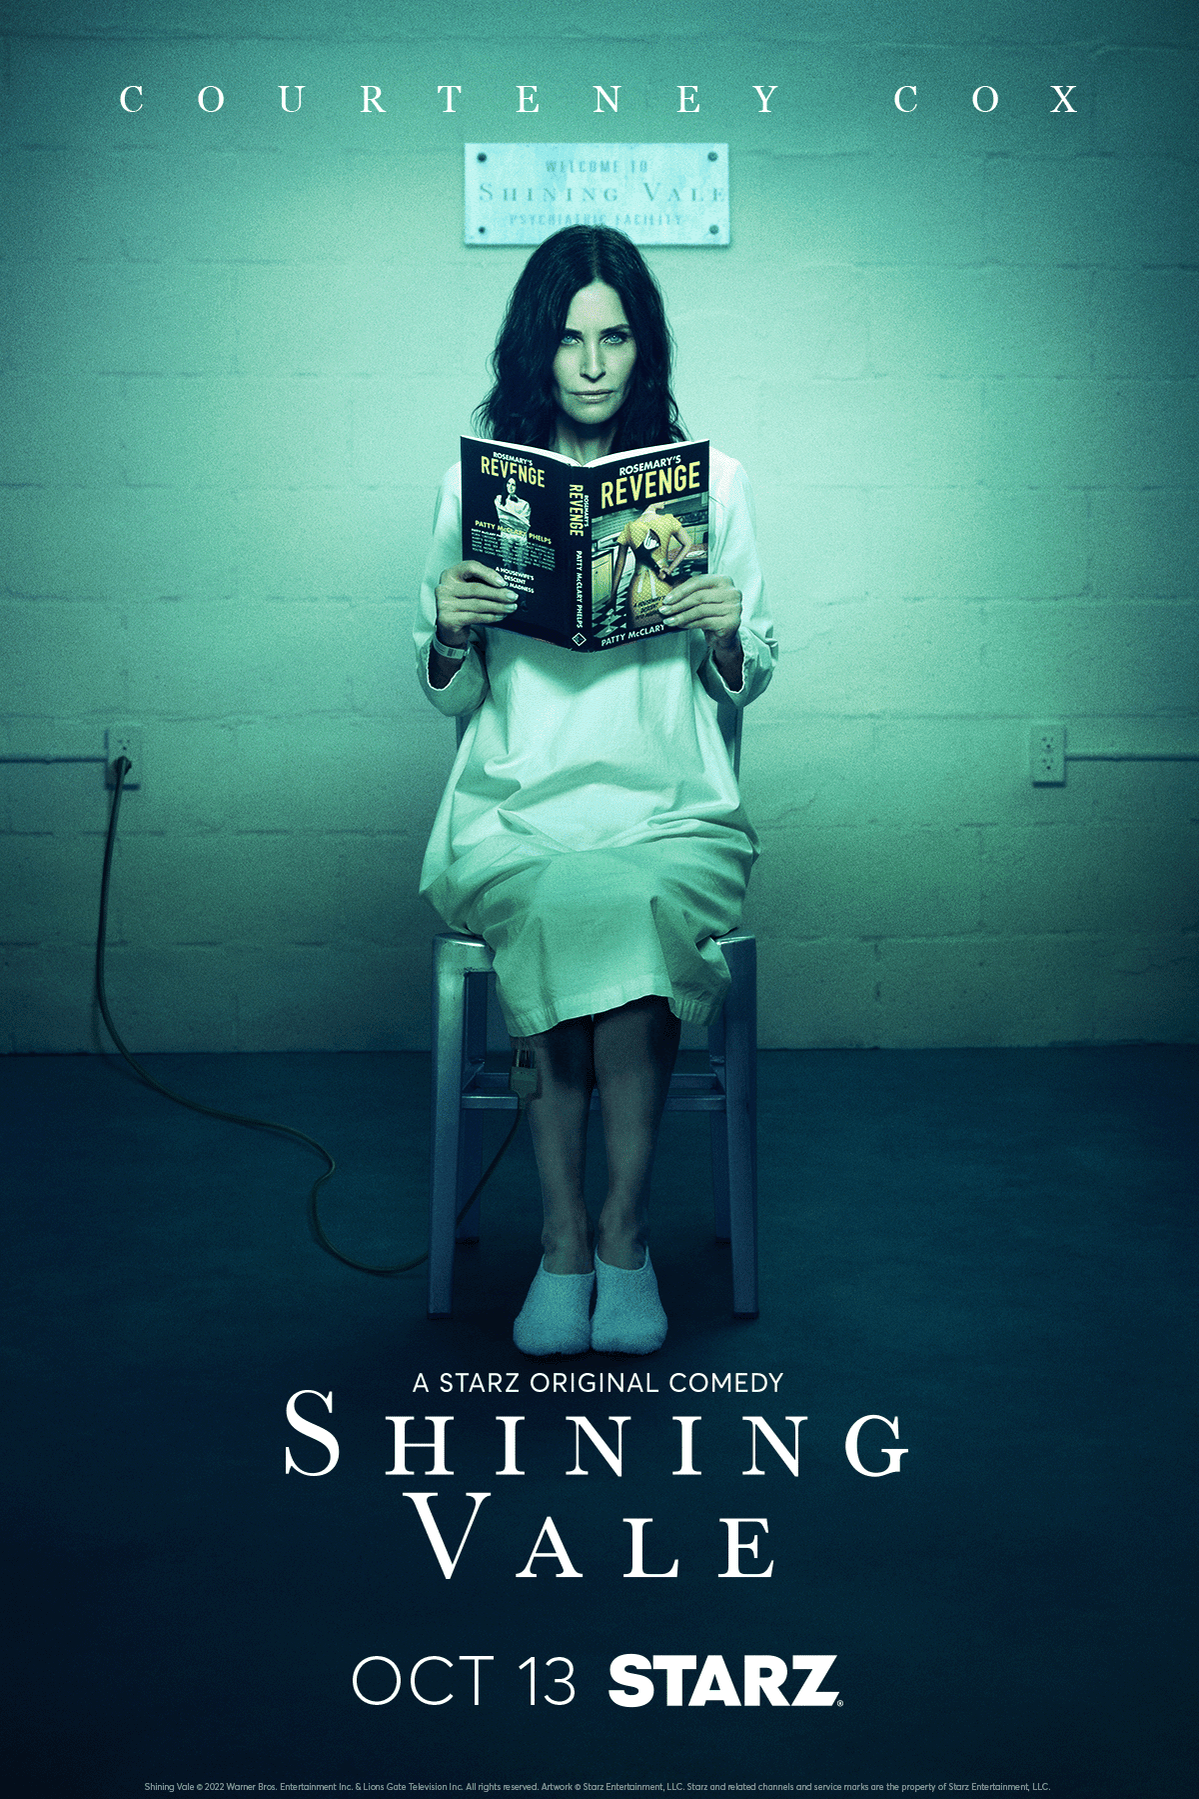 shining-vale-season-2-poster-courteney-cox.png